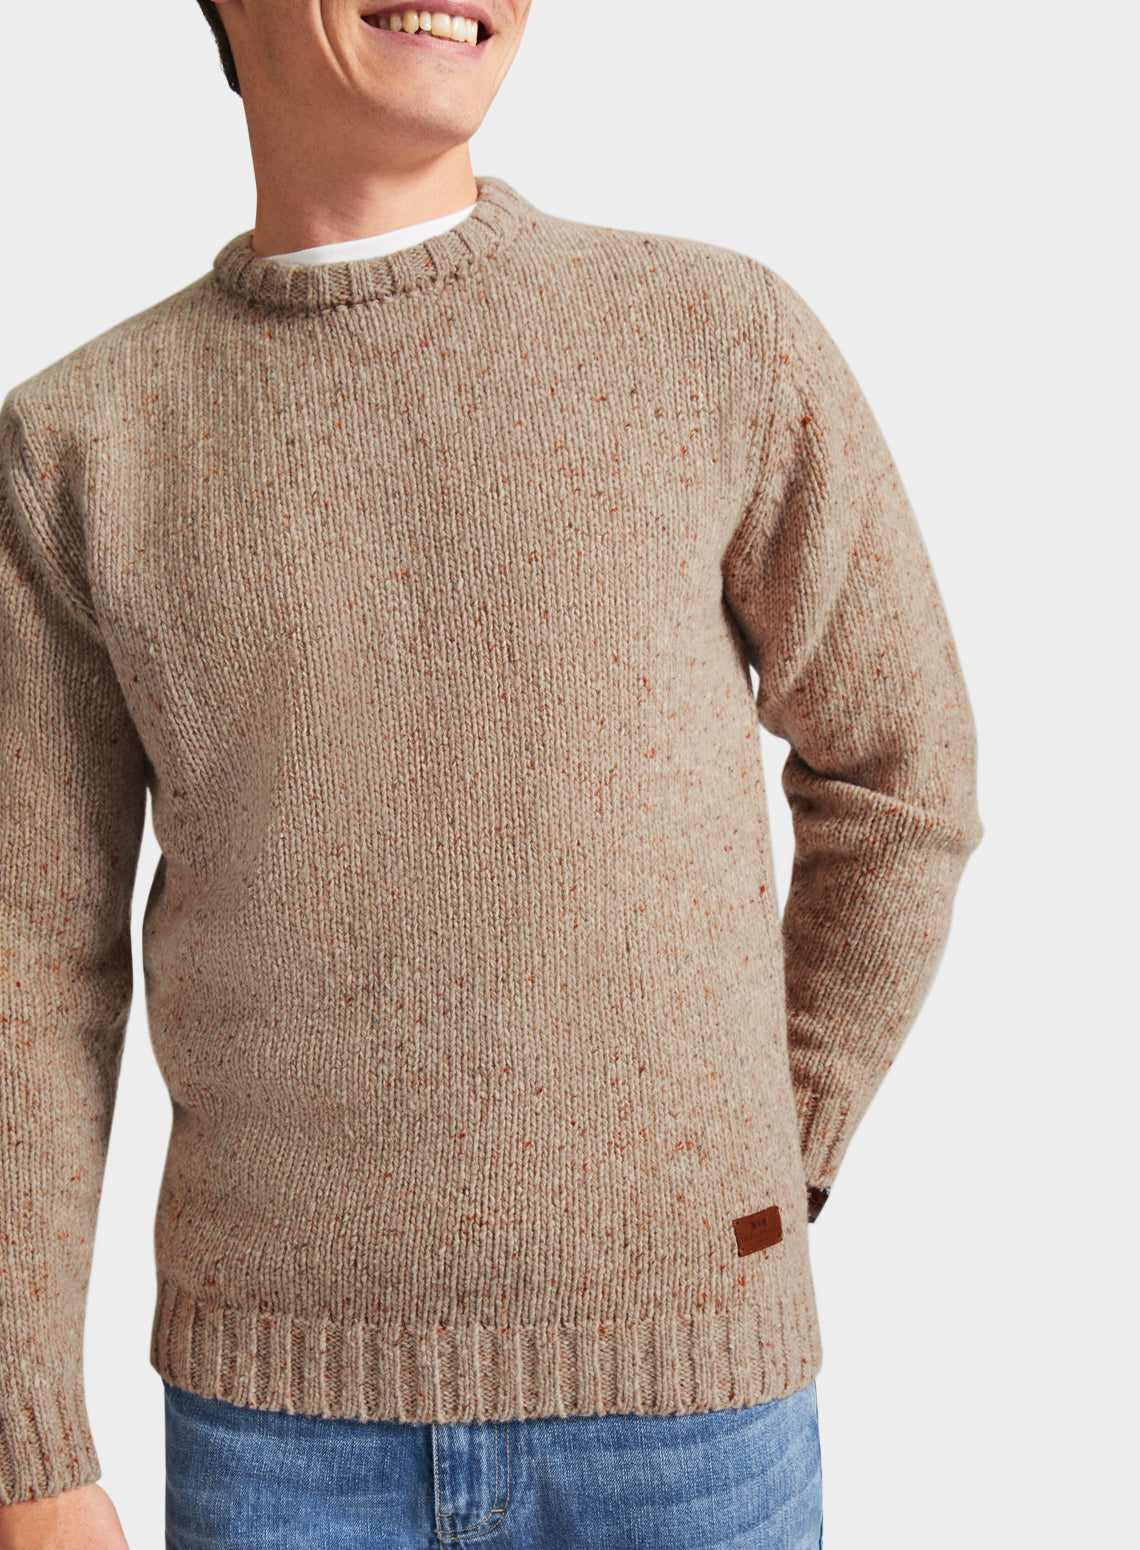 Knitted Neppy Crew Neck - Oatmeal